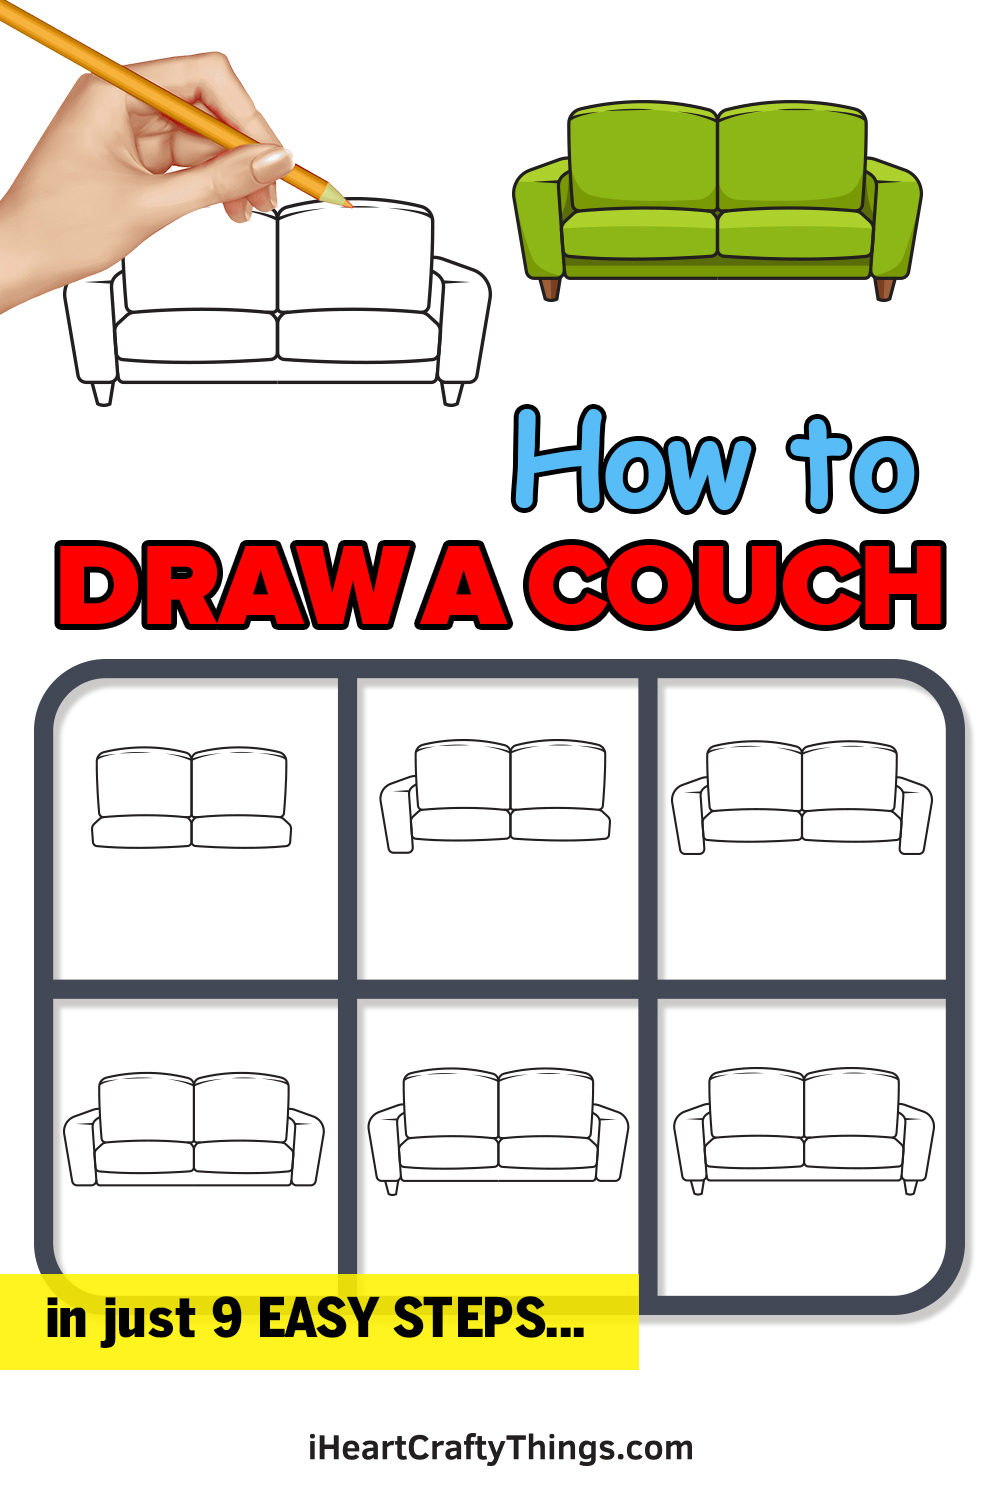 How to draw a couch in 9 easy steps